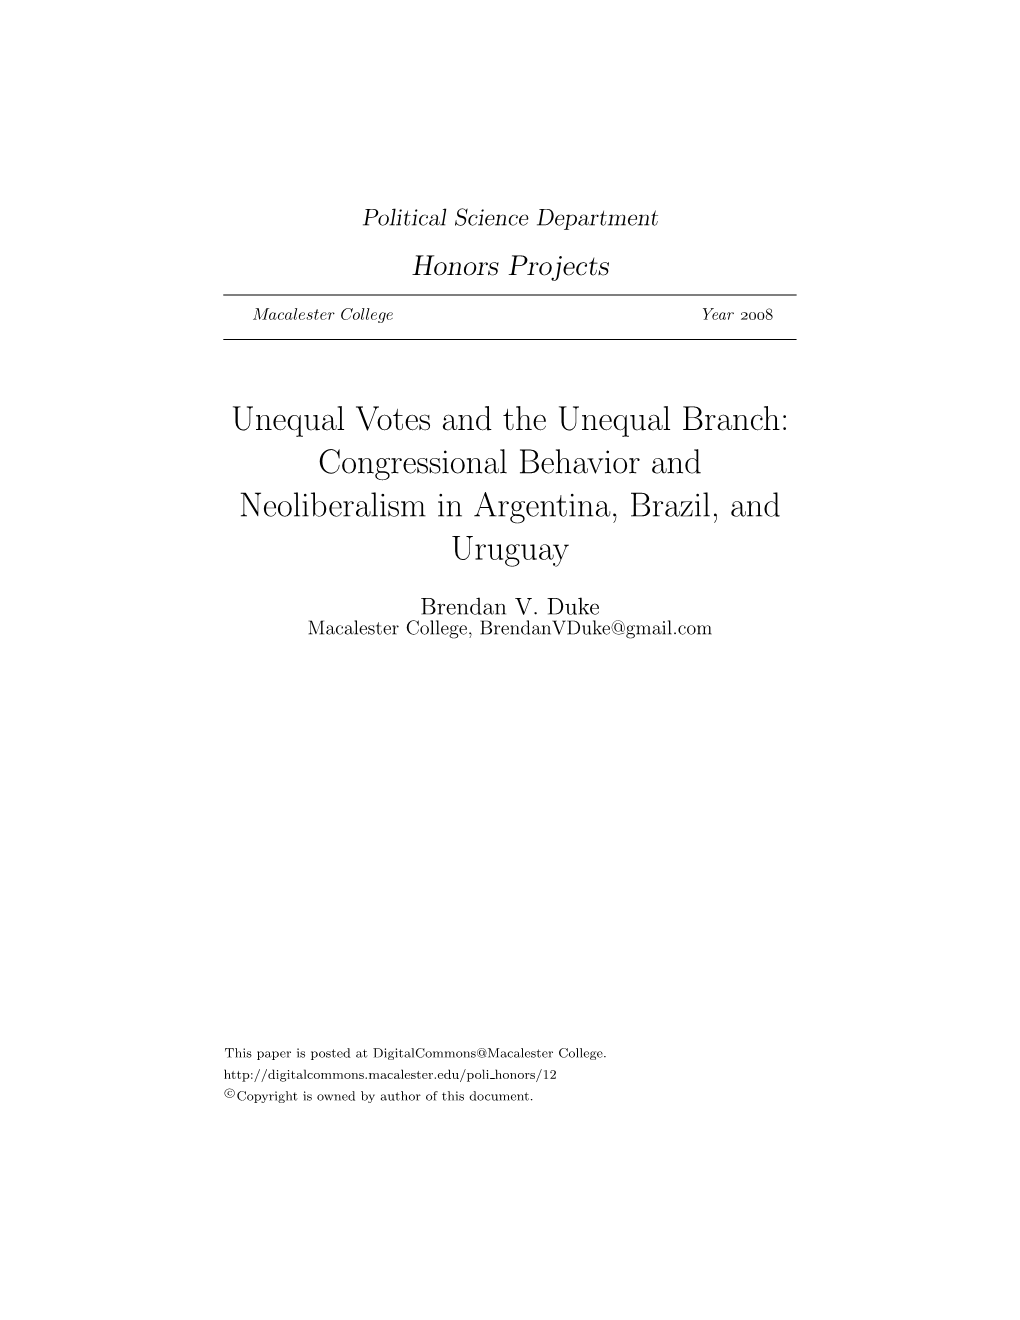 Congressional Behavior and Neoliberalism in Argentina, Brazil, and Uruguay